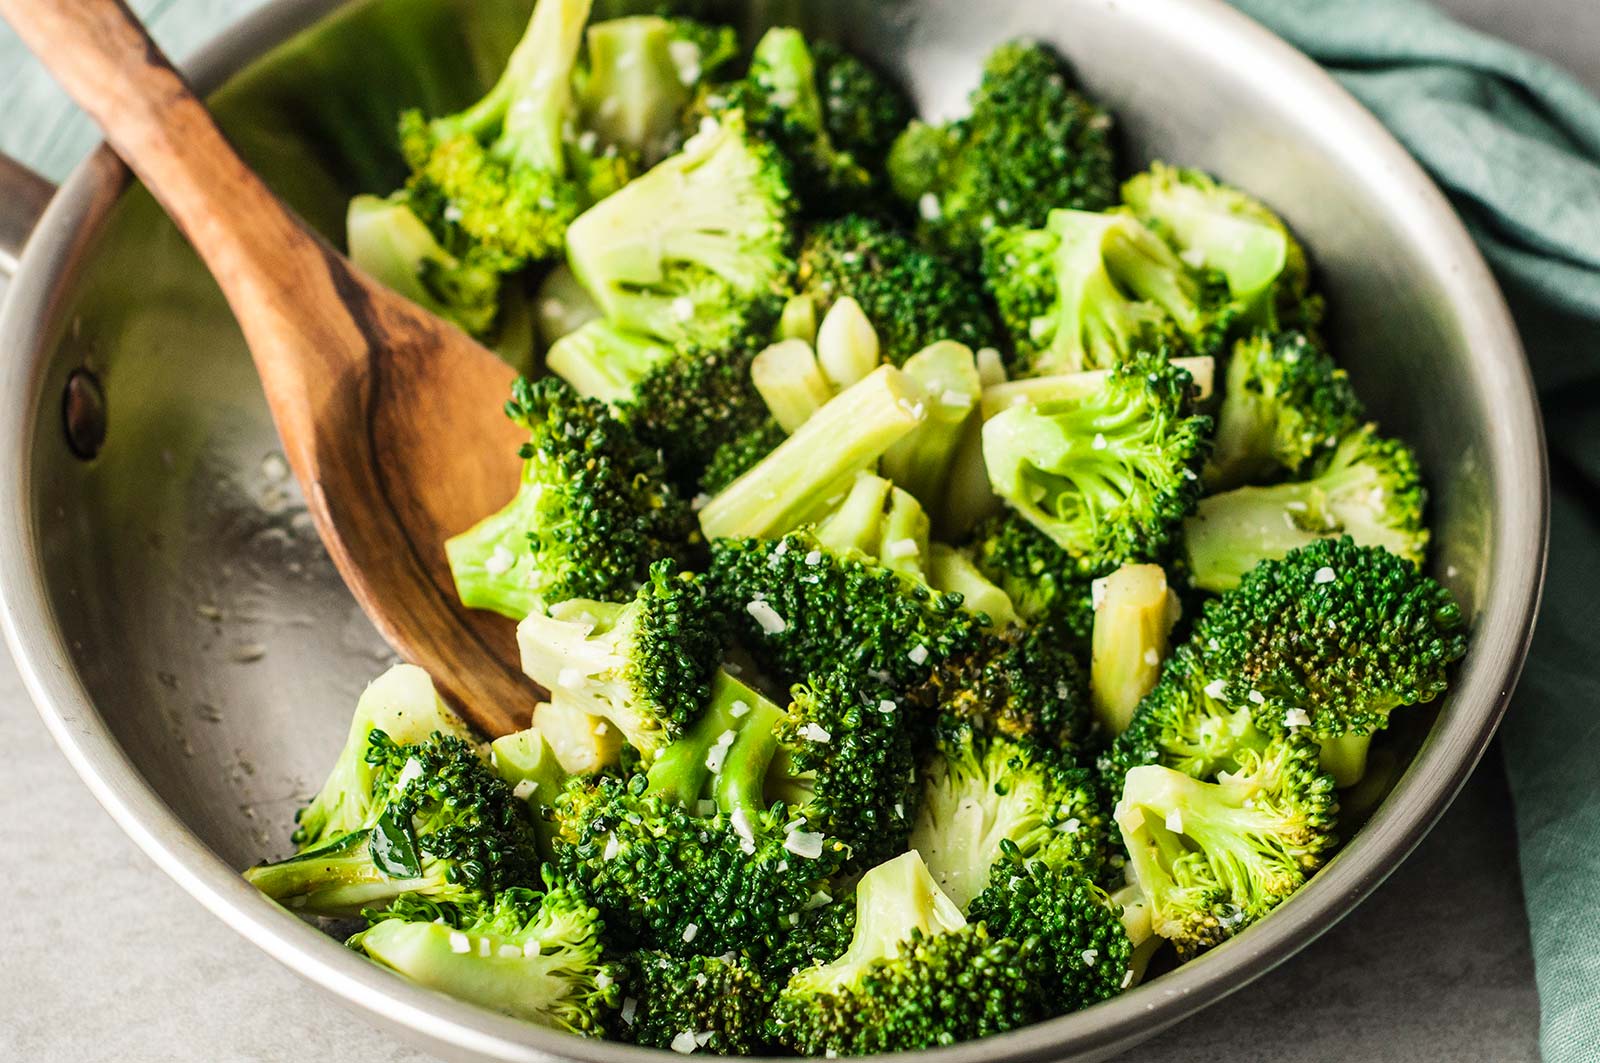 Say “Yuck” Or “Yum” to These Foods and We’ll Determine Your Exact Age Broccoli